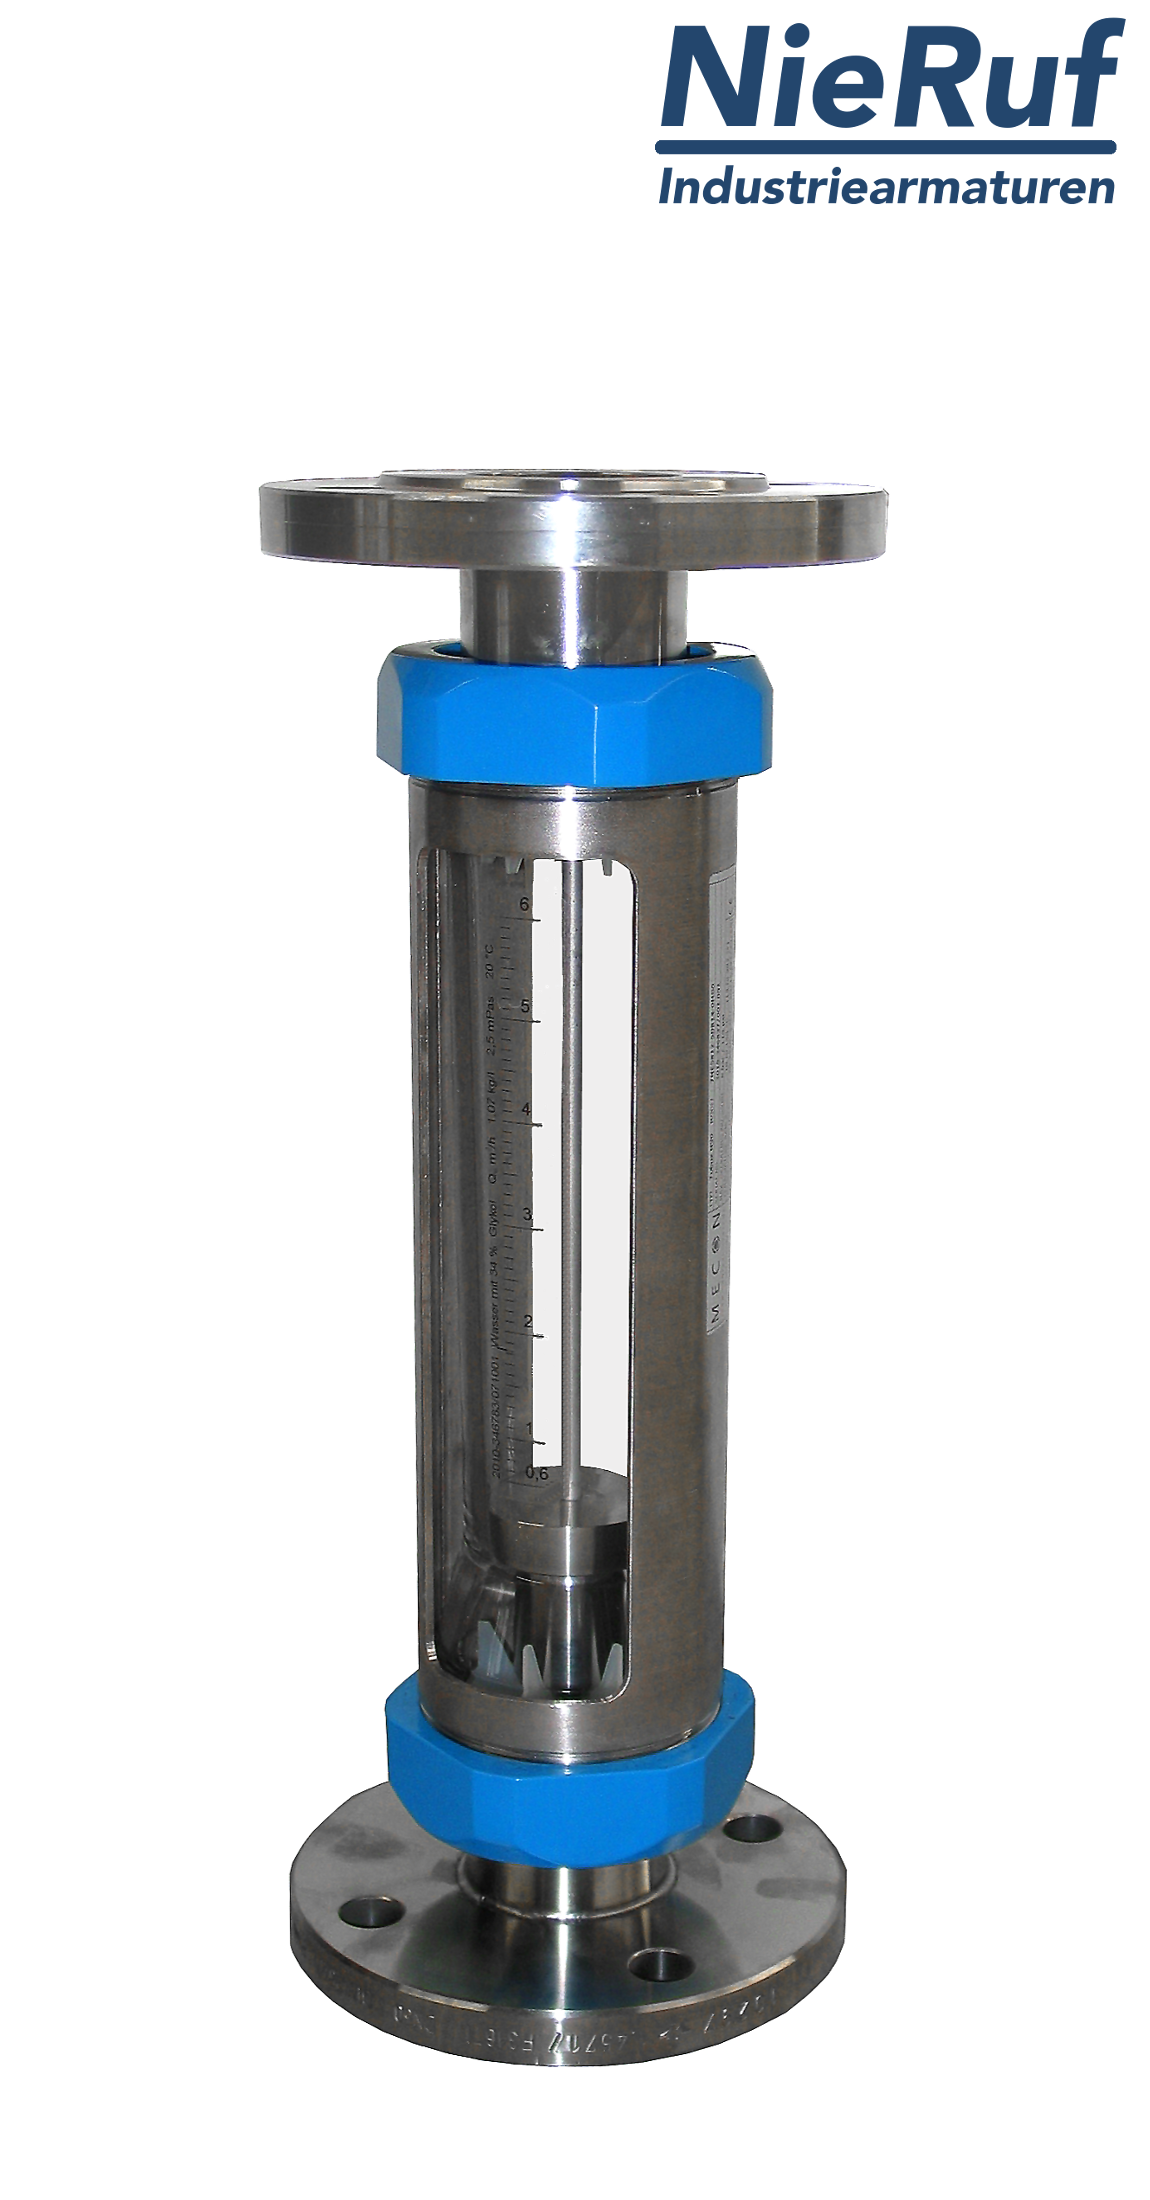 Variable area flowmeter stainless steel + borosilicate flange DN20 0.3 - 3.0 l/h water FKM